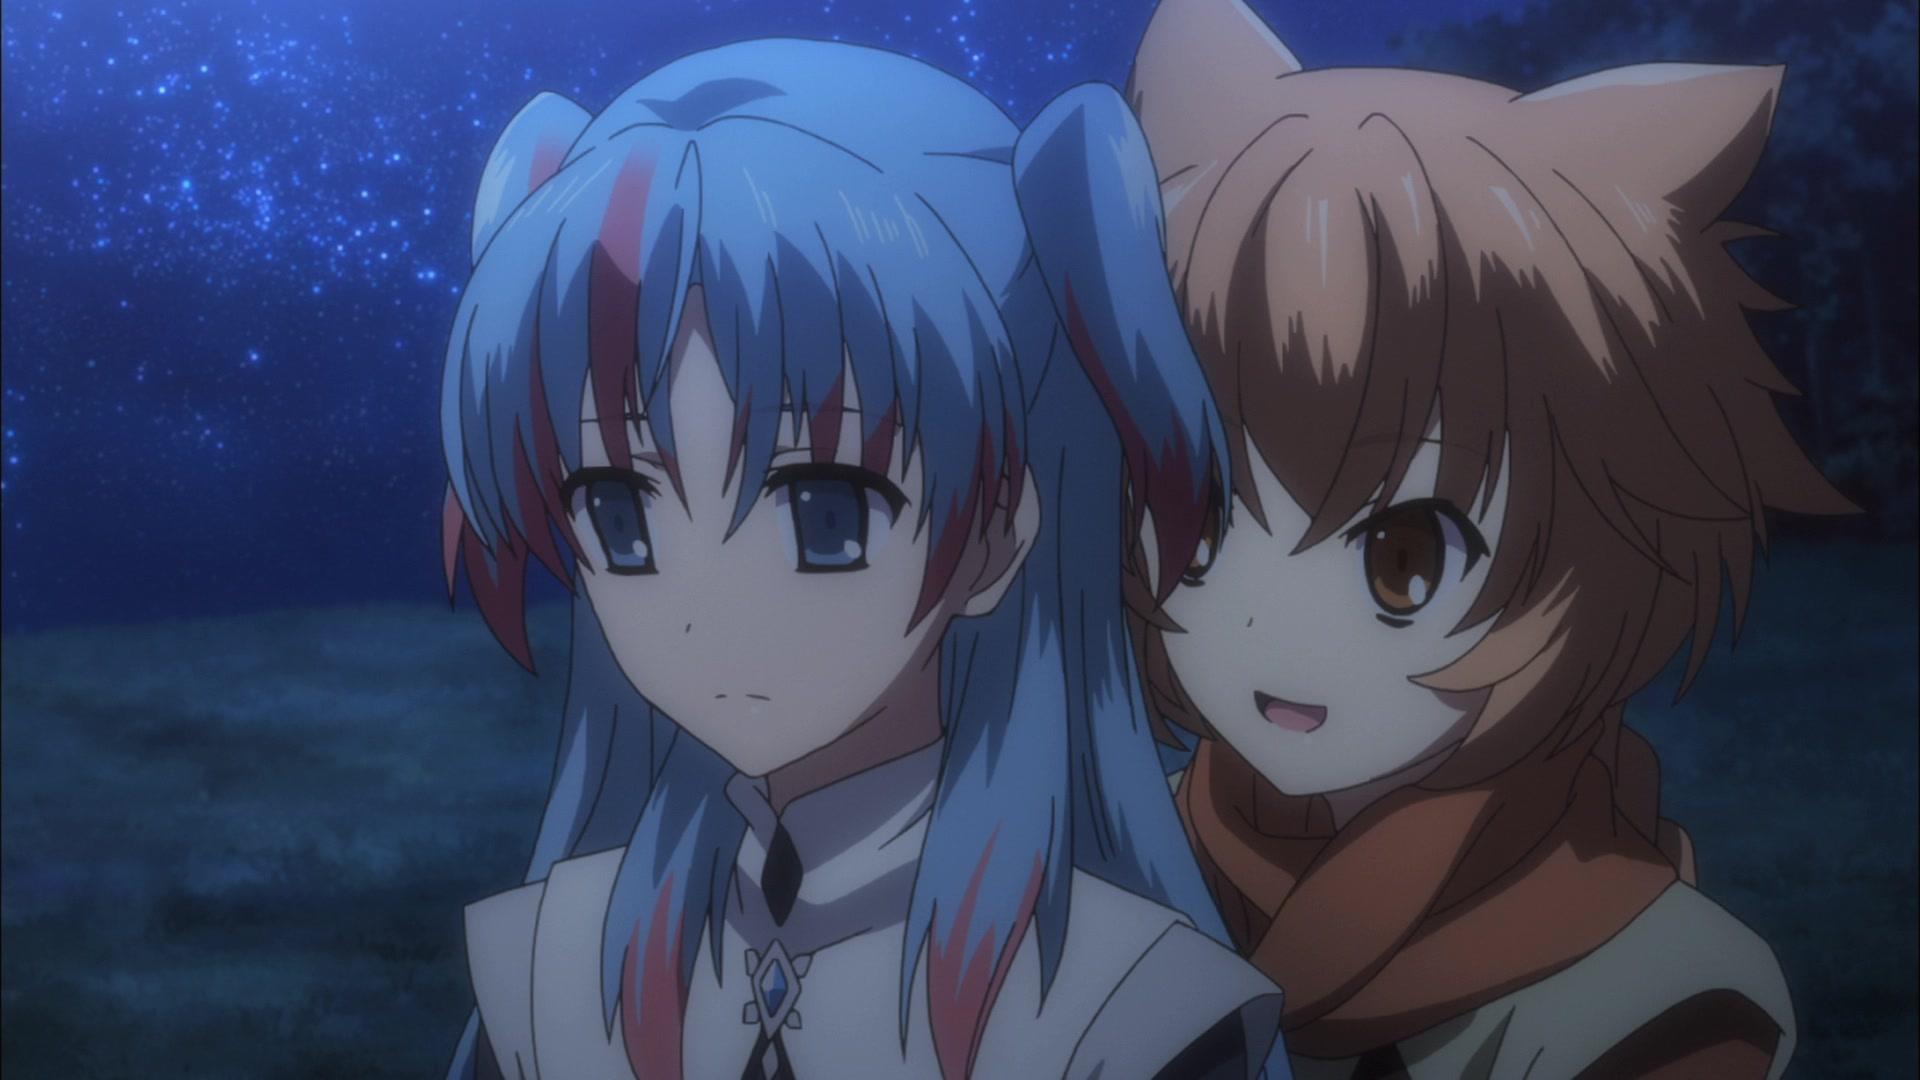 WorldEnd: What are you doing at the end of the world? Are you busy